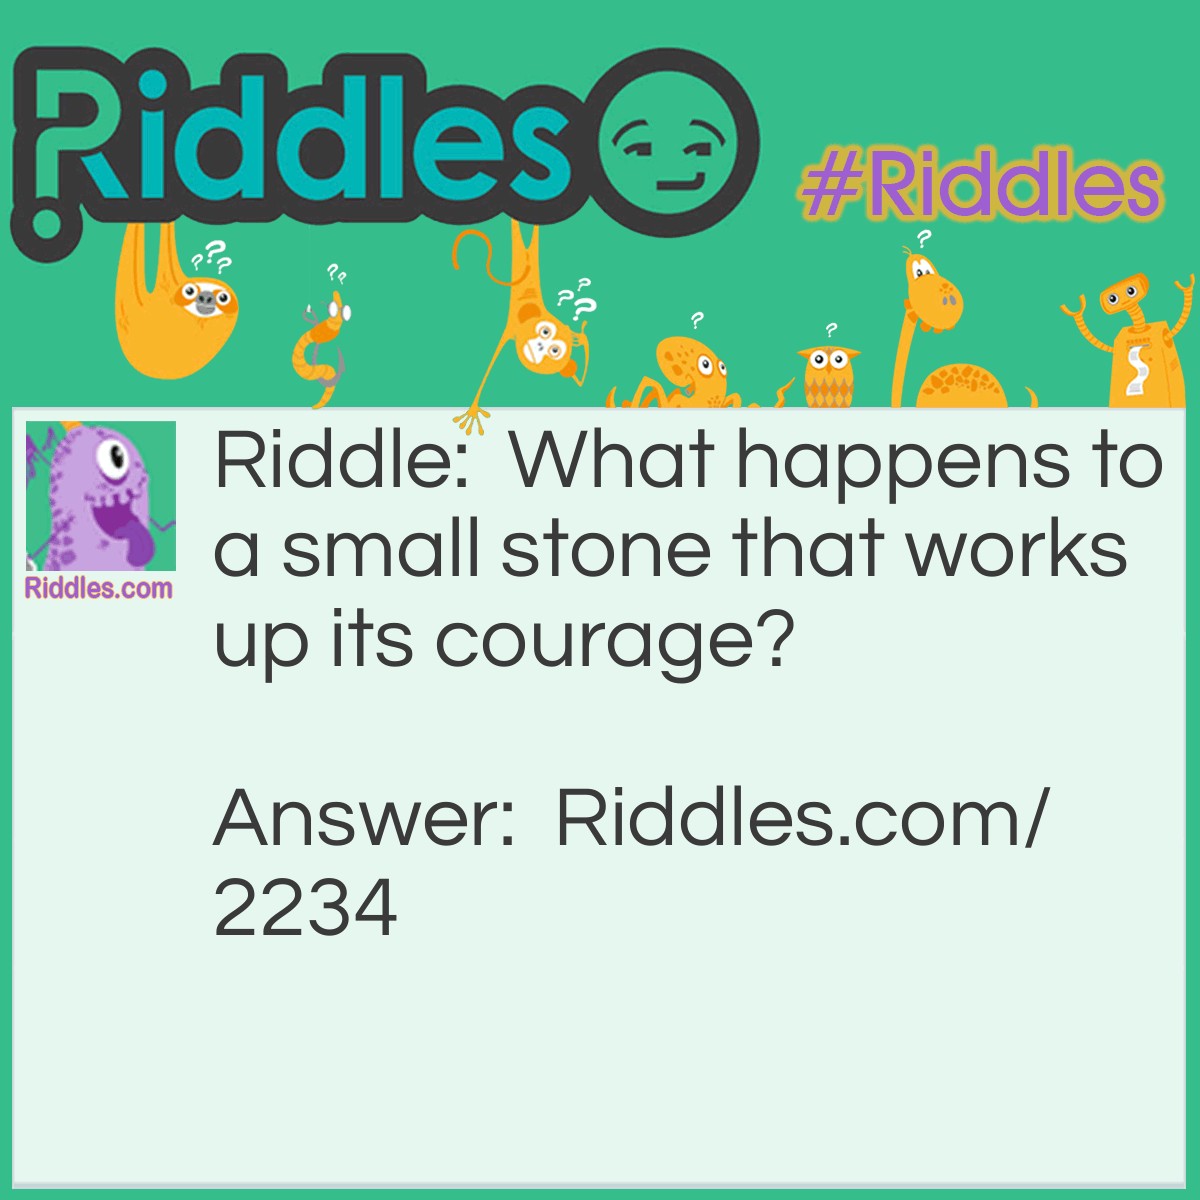 Riddle: What happens to a small stone that works up its courage? Answer: It becomes a little boulder.